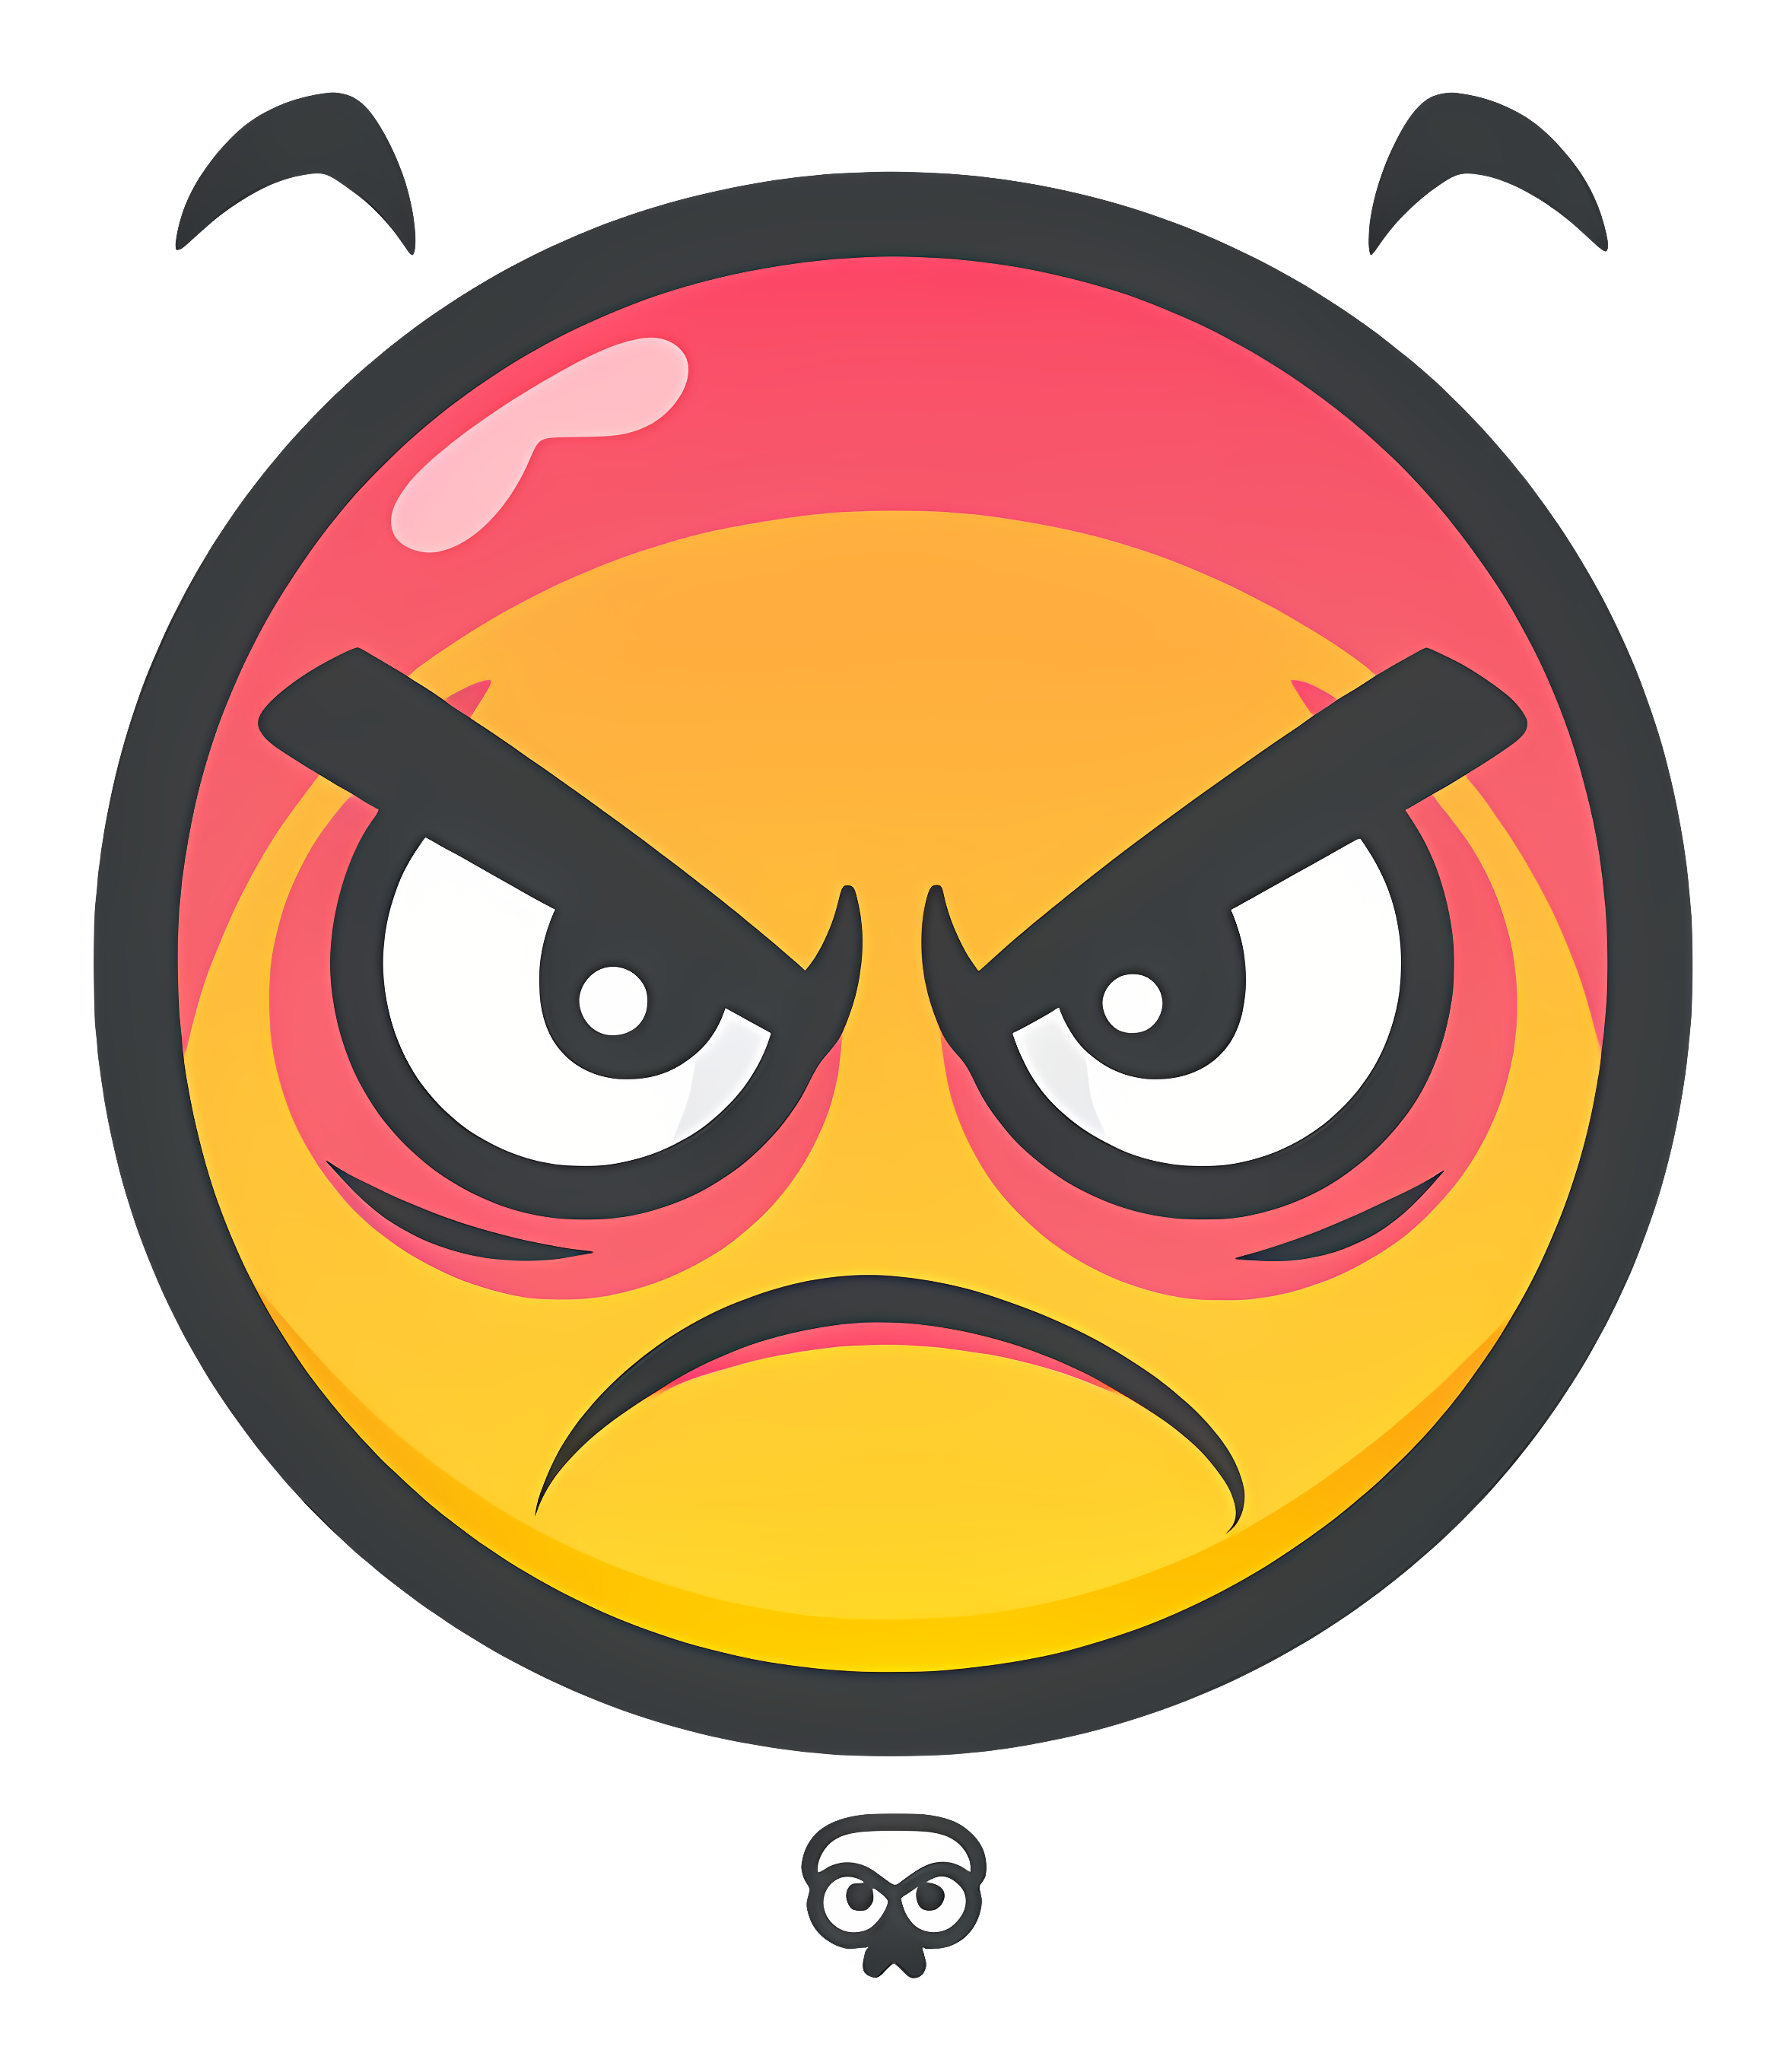 Angry face emoji with red smiley mouth Clipart